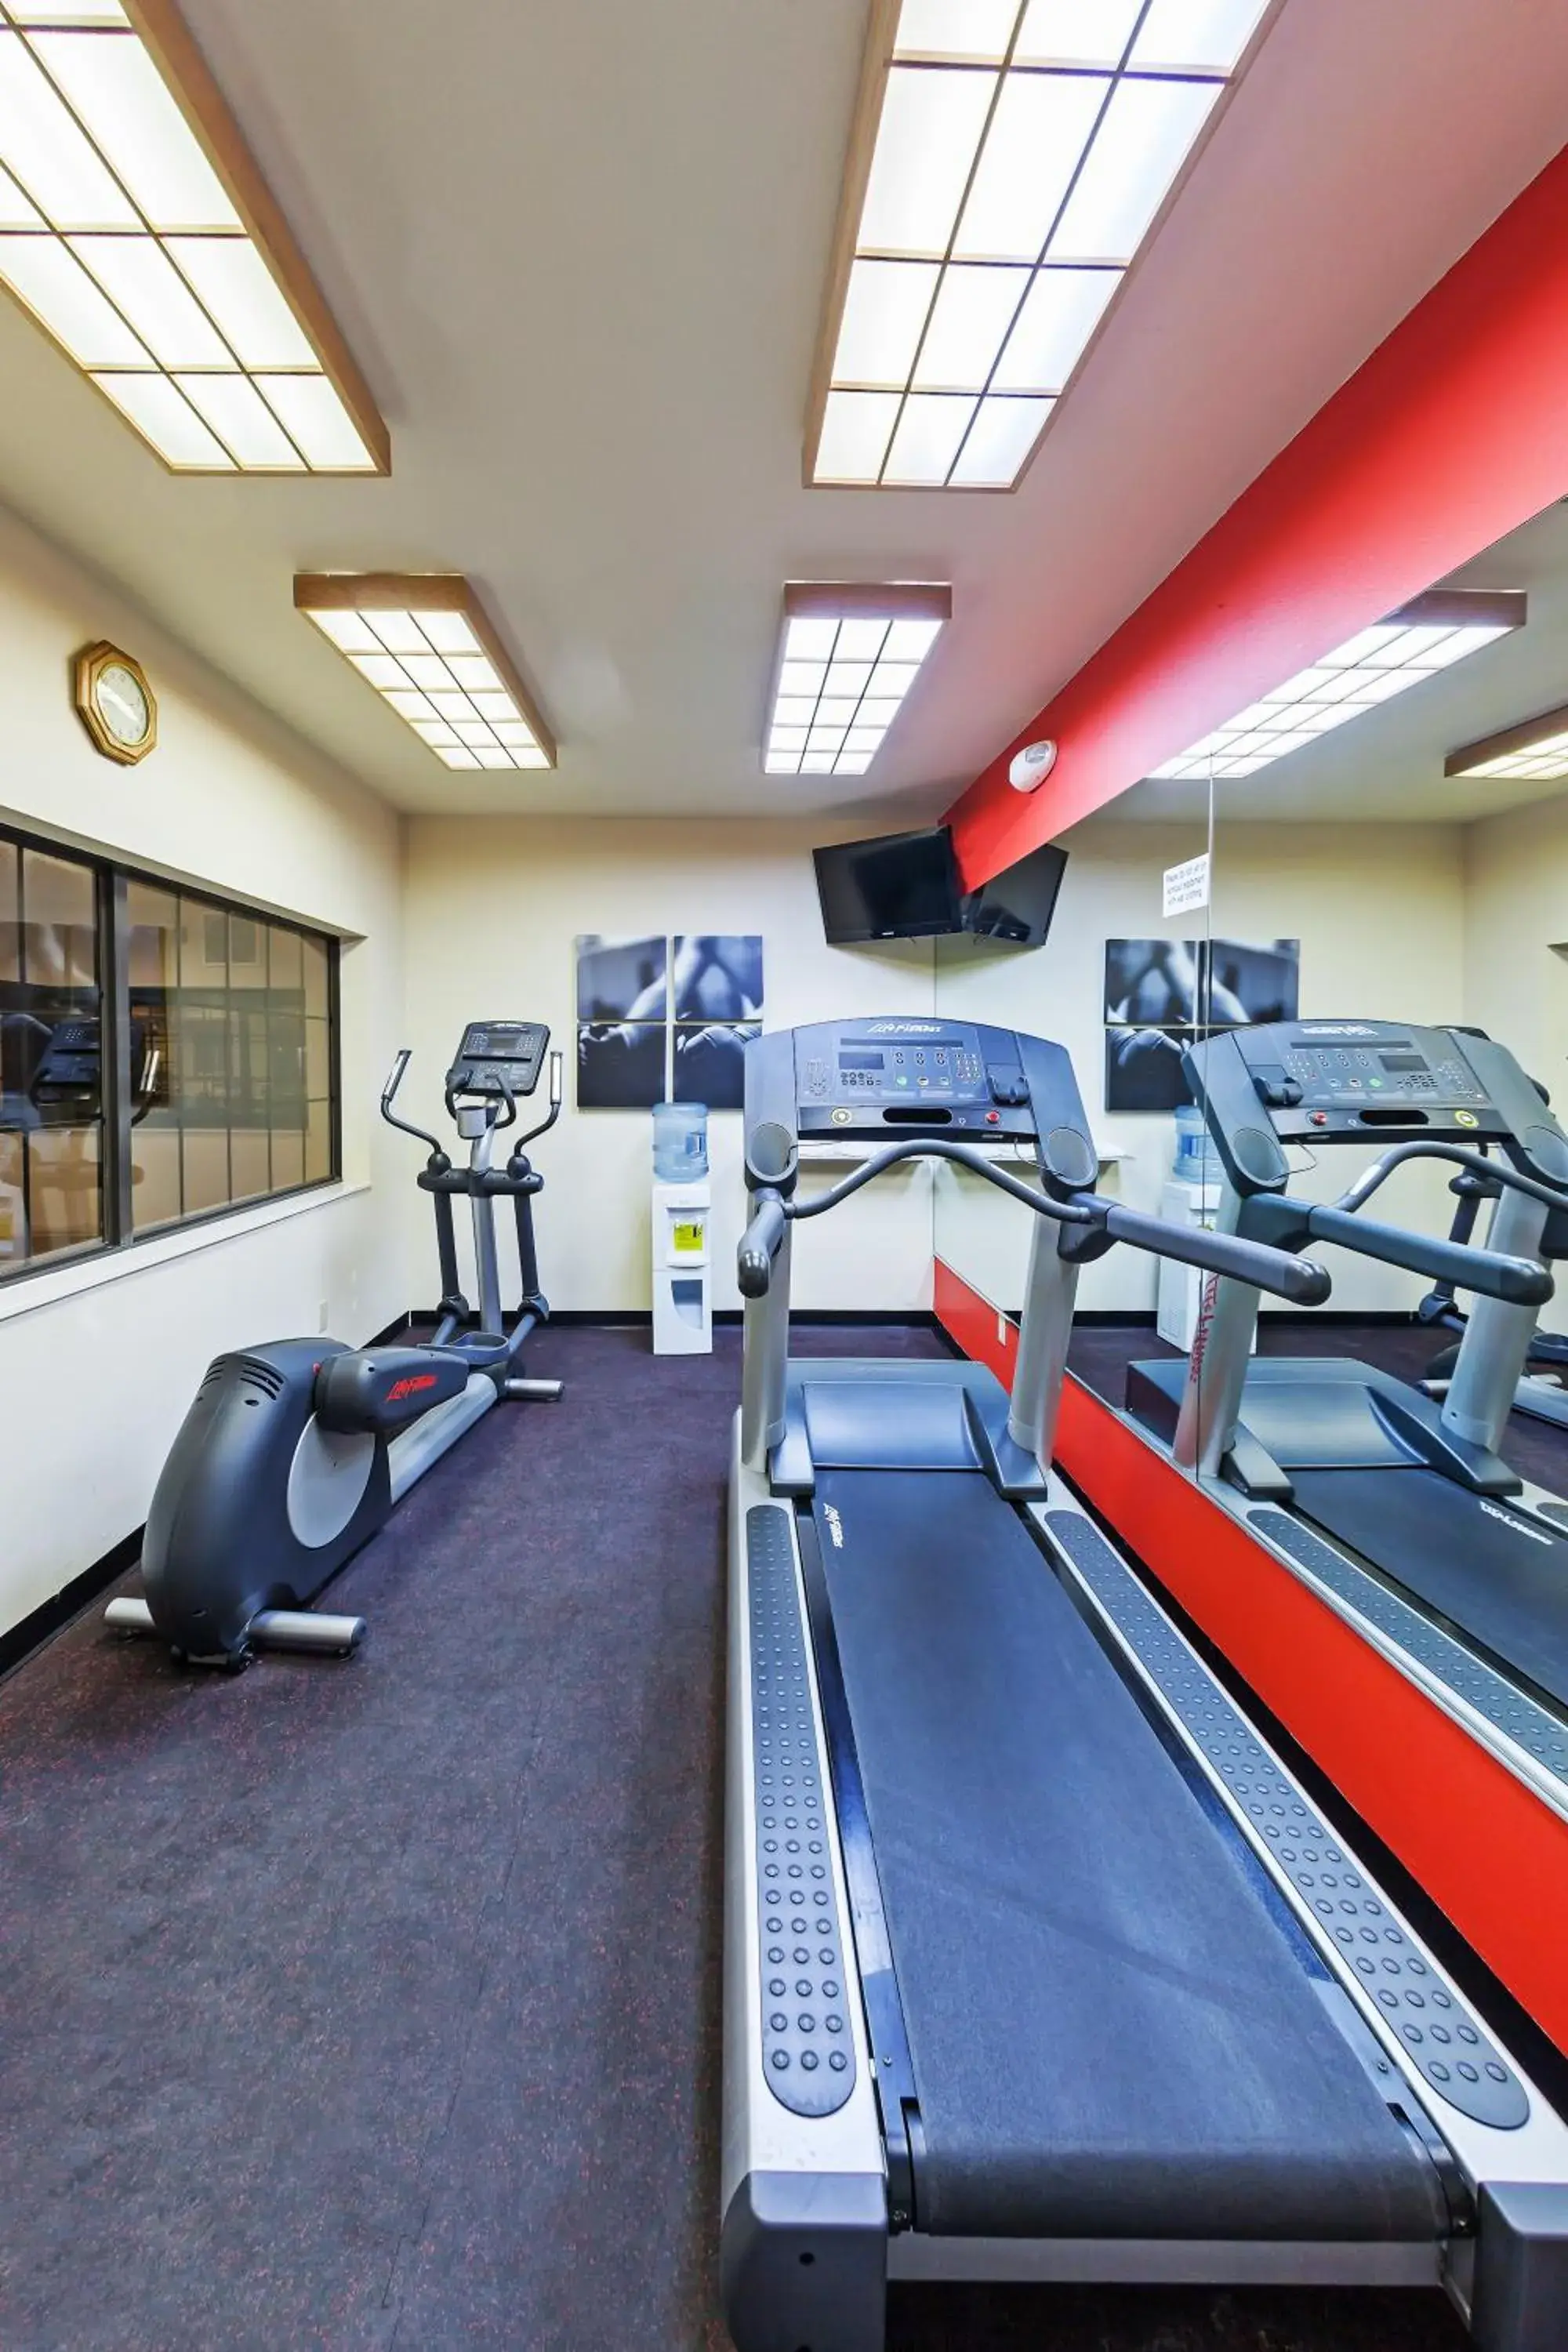 Fitness centre/facilities, Fitness Center/Facilities in Country Inn & Suites by Radisson, Lubbock, TX